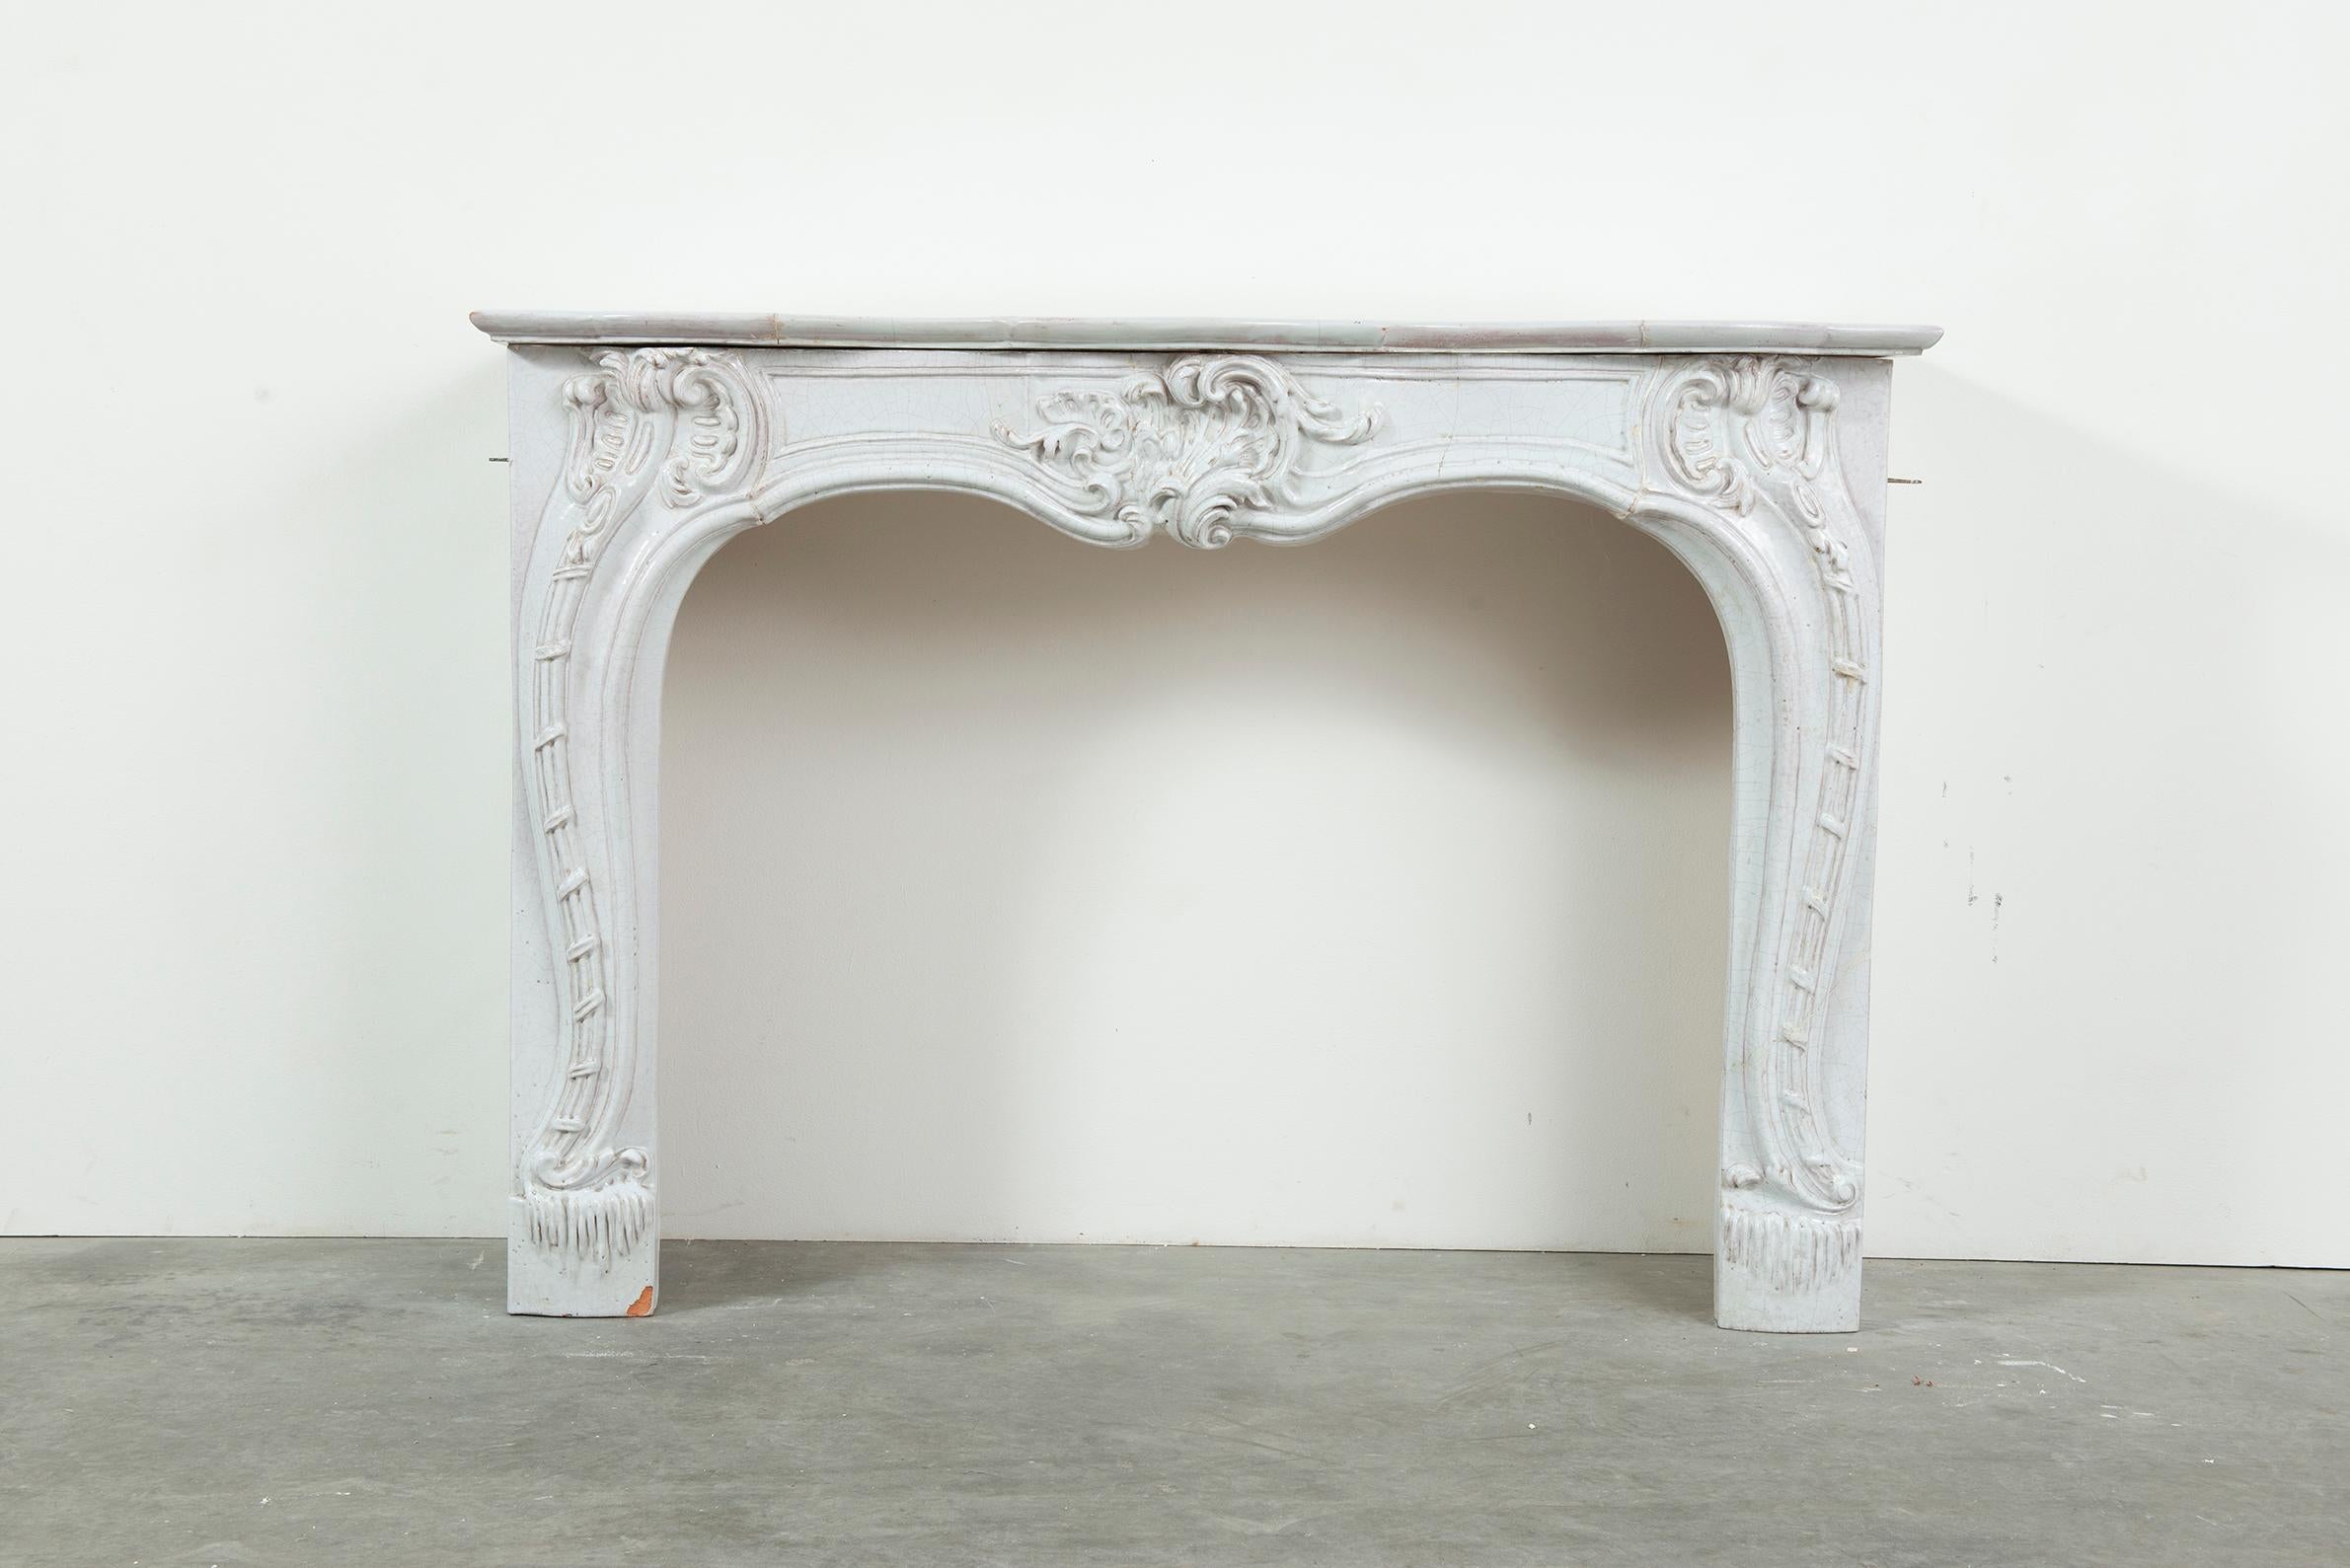 Southern France 19th century porcelain Neo Rococo fireplace, very decorative.

Opening measurements : 32.2 x 40.5 inch (height x width).